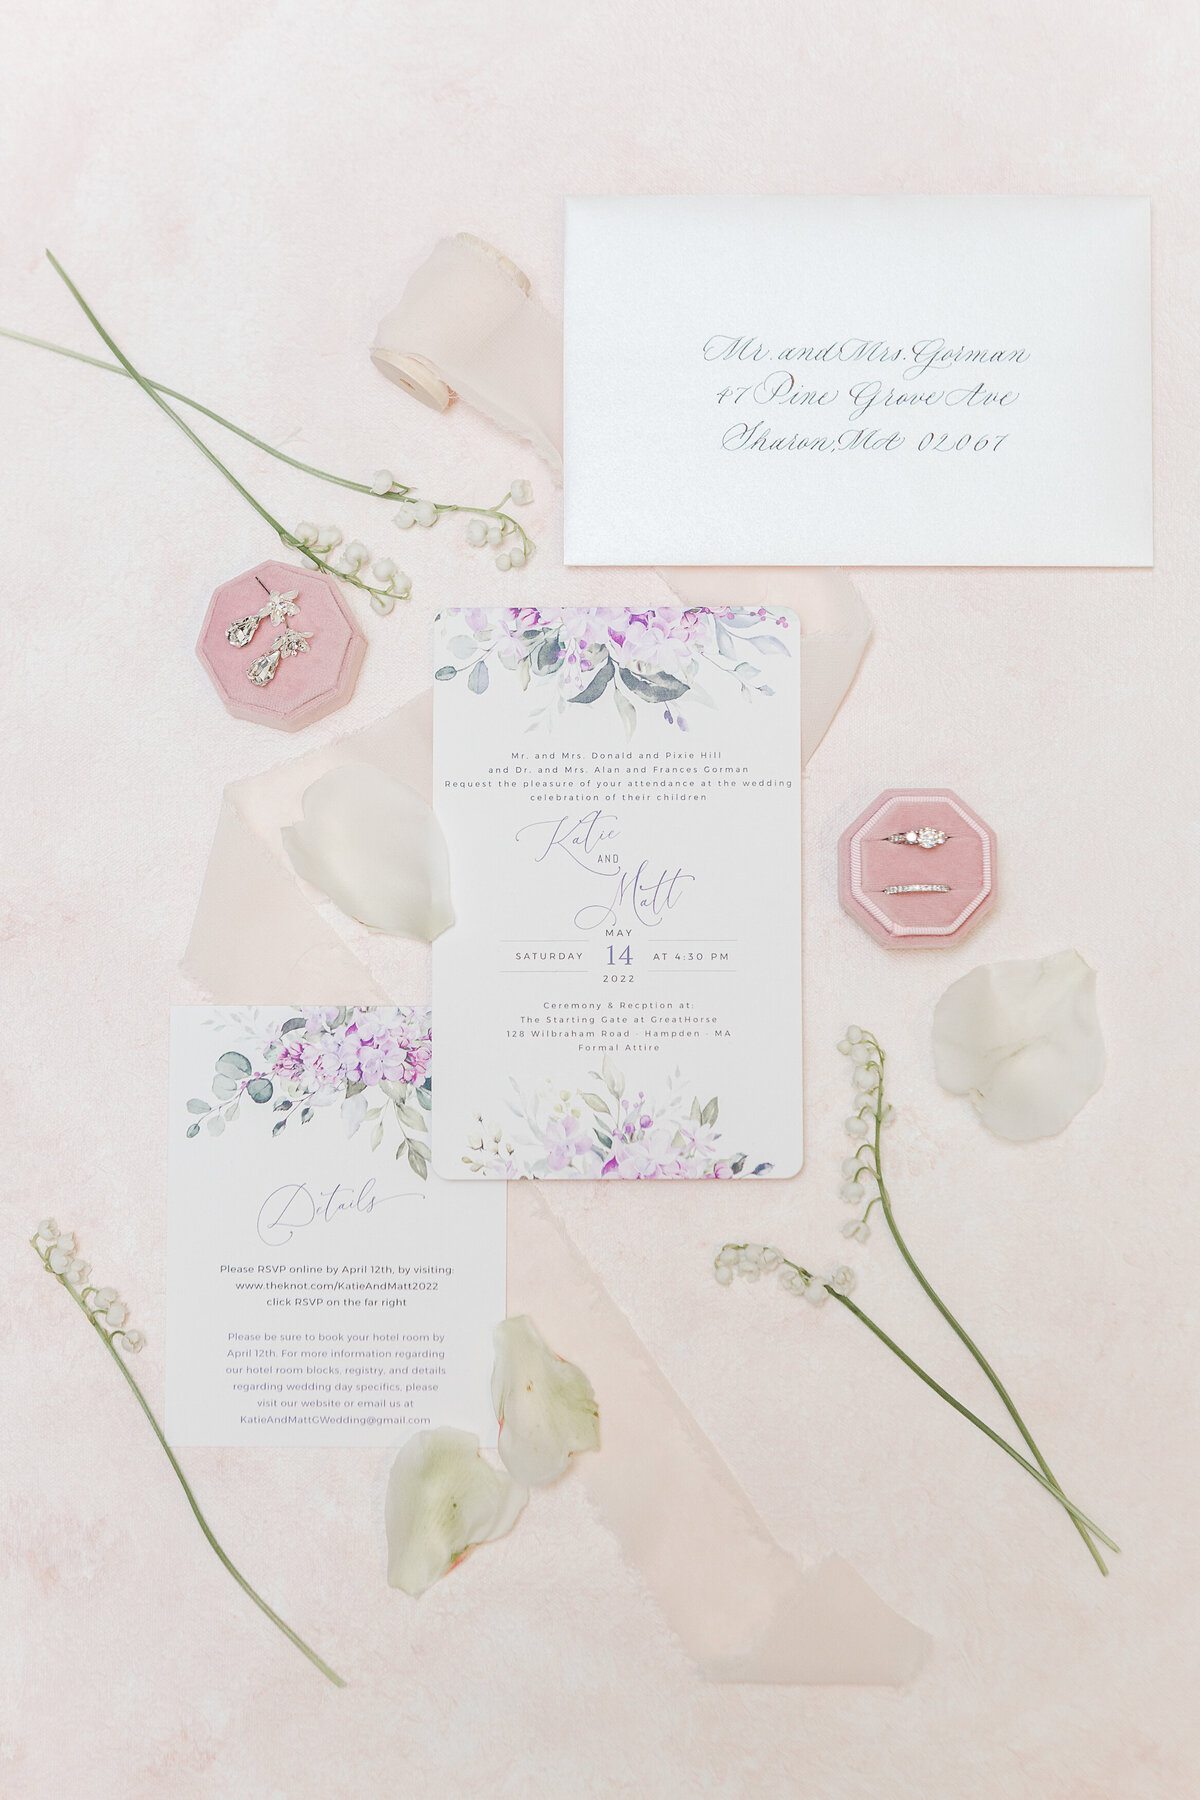 Wedding stationary is featured in a flat lay capturing the details. The image is accented with the rings, ribbon, flowers, and flower petals.